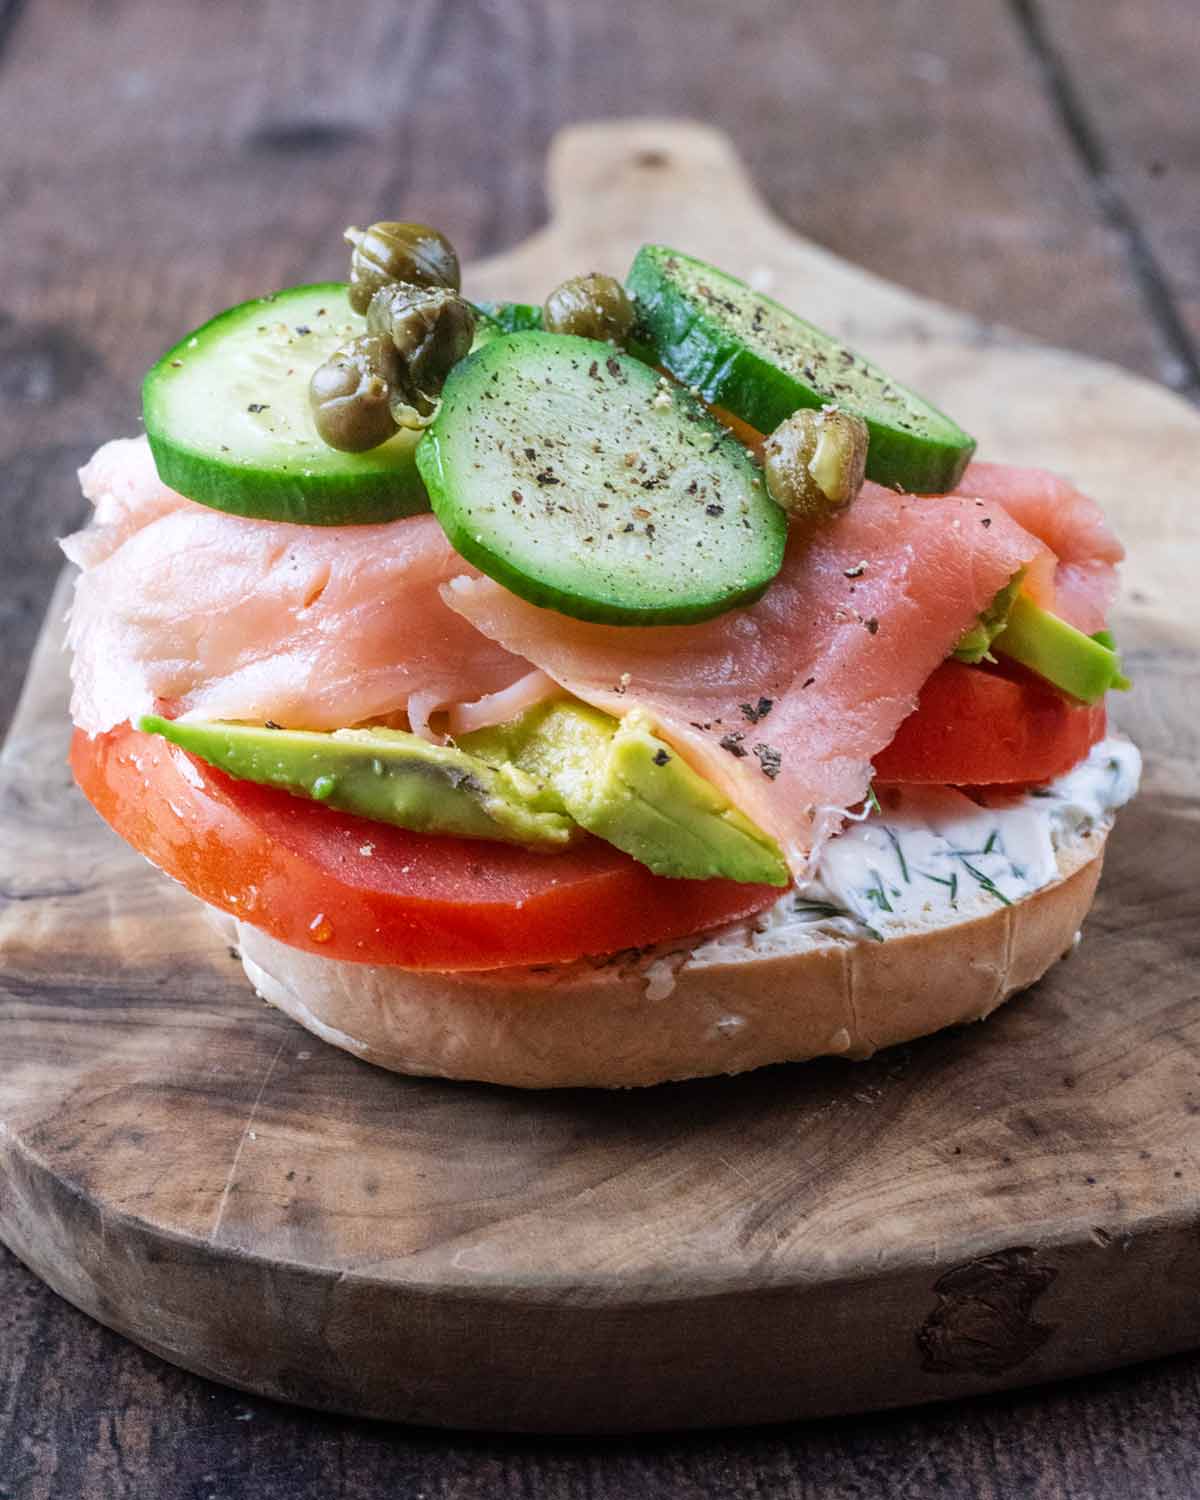 A bagel half topped with cream cheese, tomato slices, salmon, avocado, cucumber slices and capers.